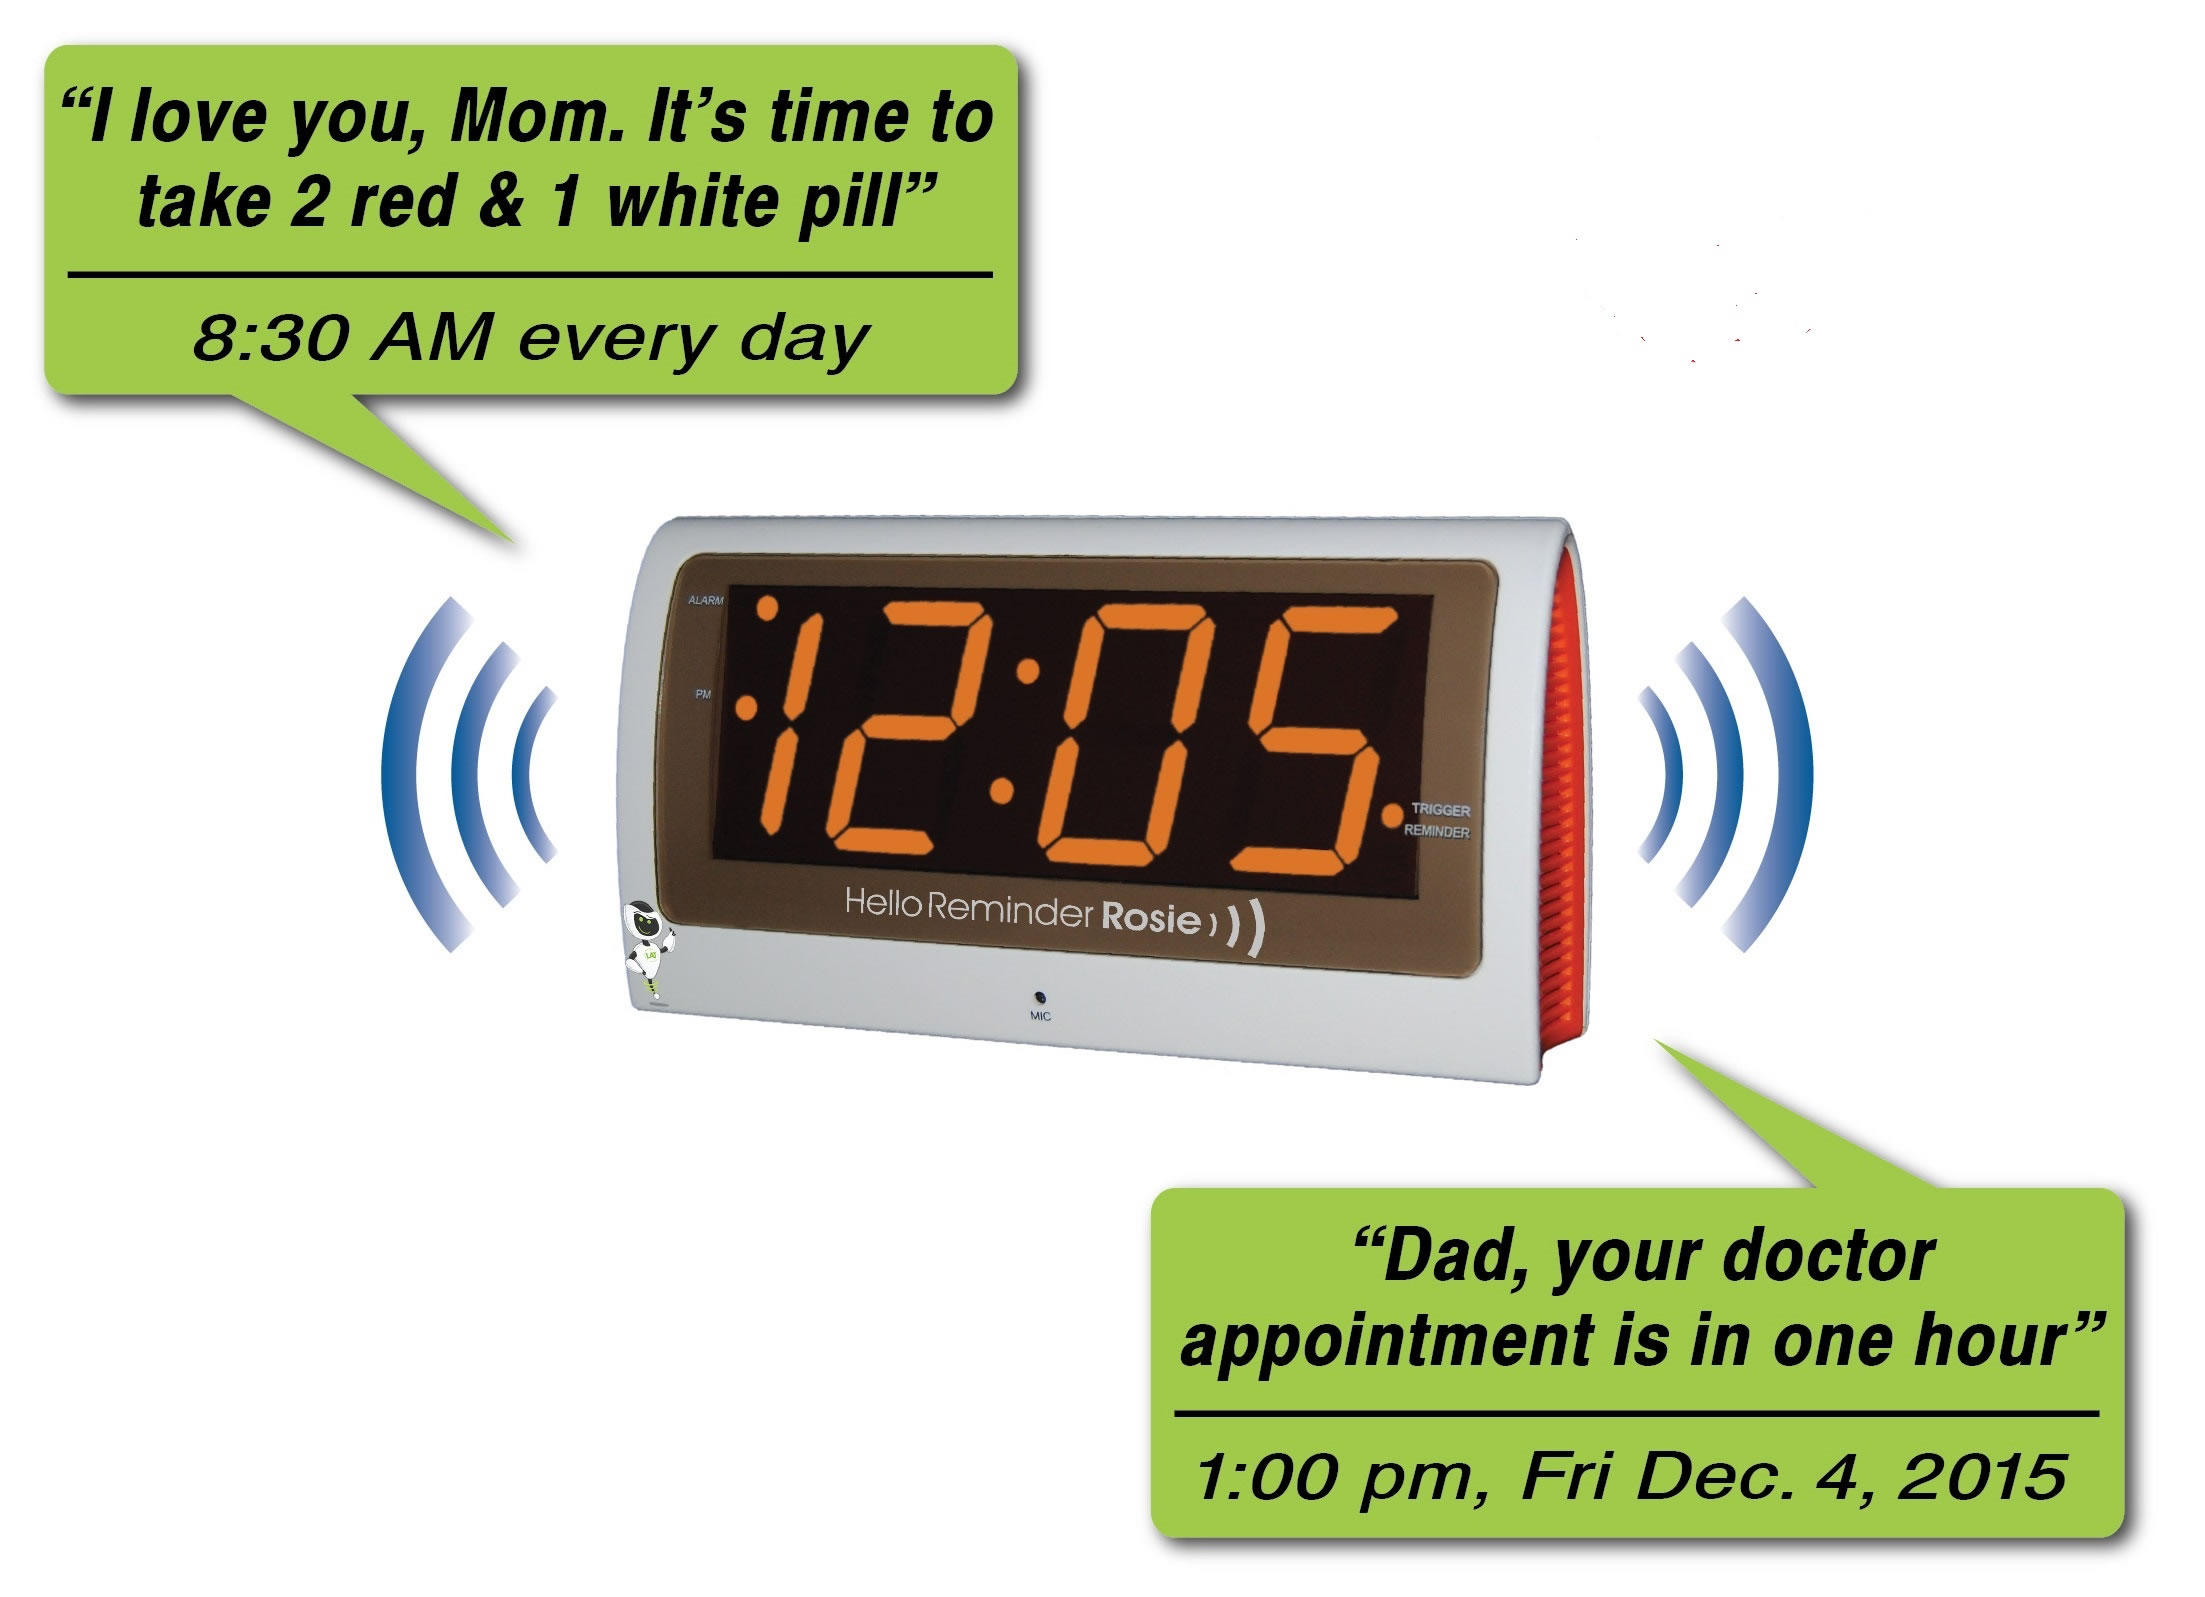 The Reminder Rosie allows caregivers to record messages for their loved ones that play at designated times, reminding them to take medications or attend important events.